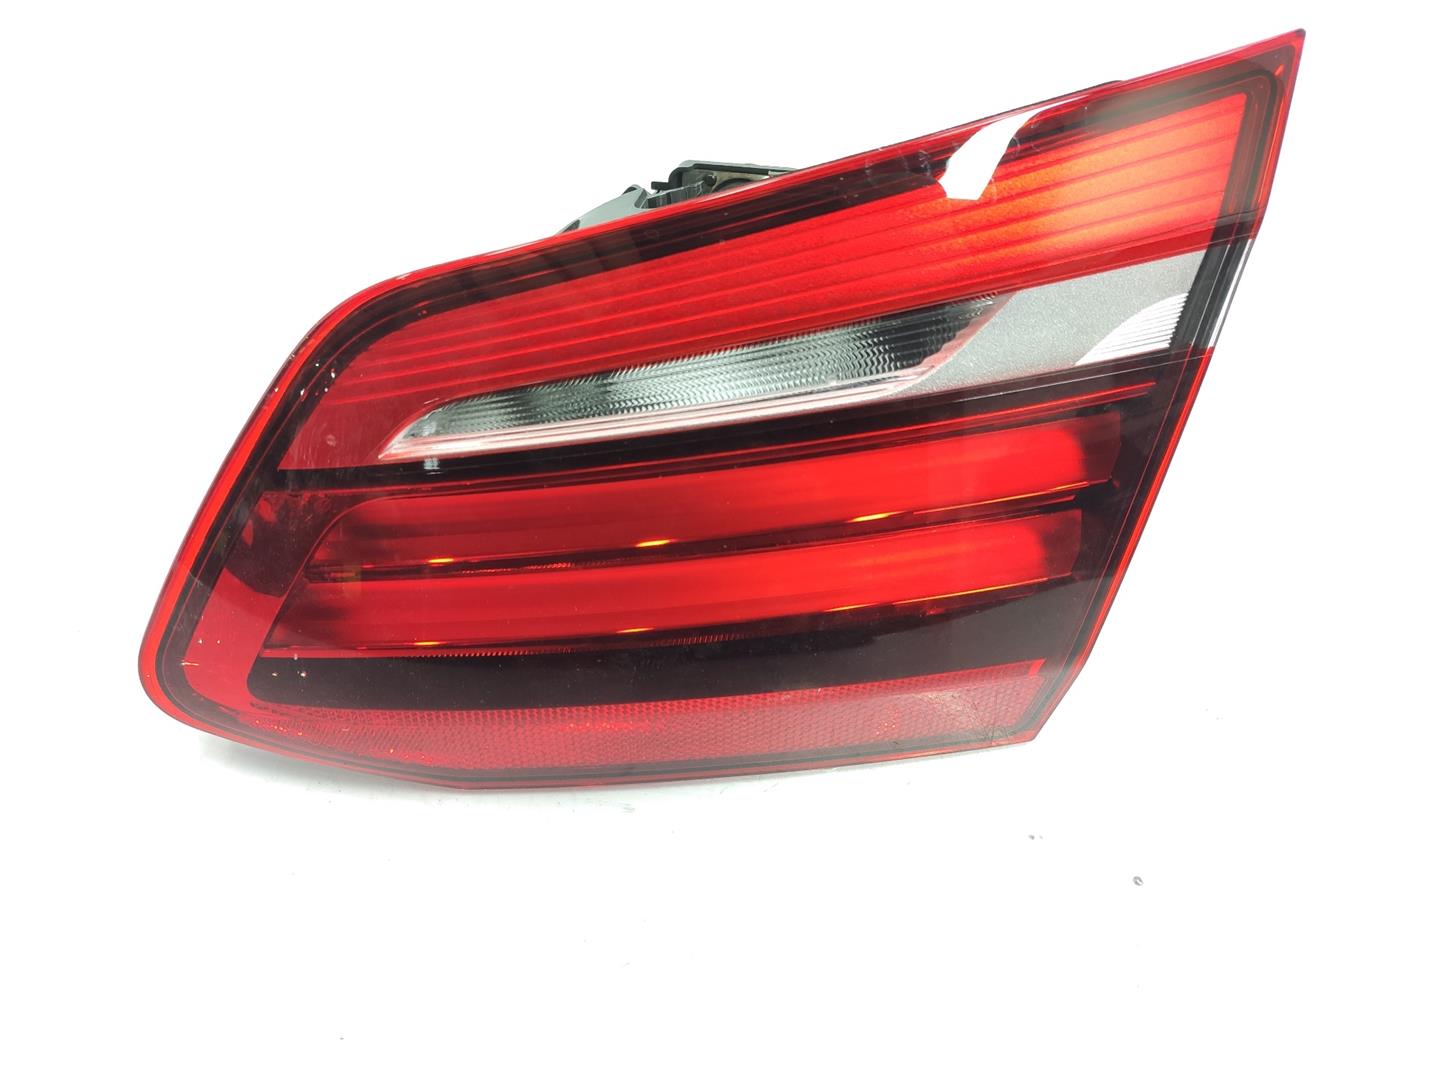 BMW 2 Series Active Tourer F45 (2014-2018) Rear Right Taillight Lamp 7491342, 63217491342, 1212CD 24134746